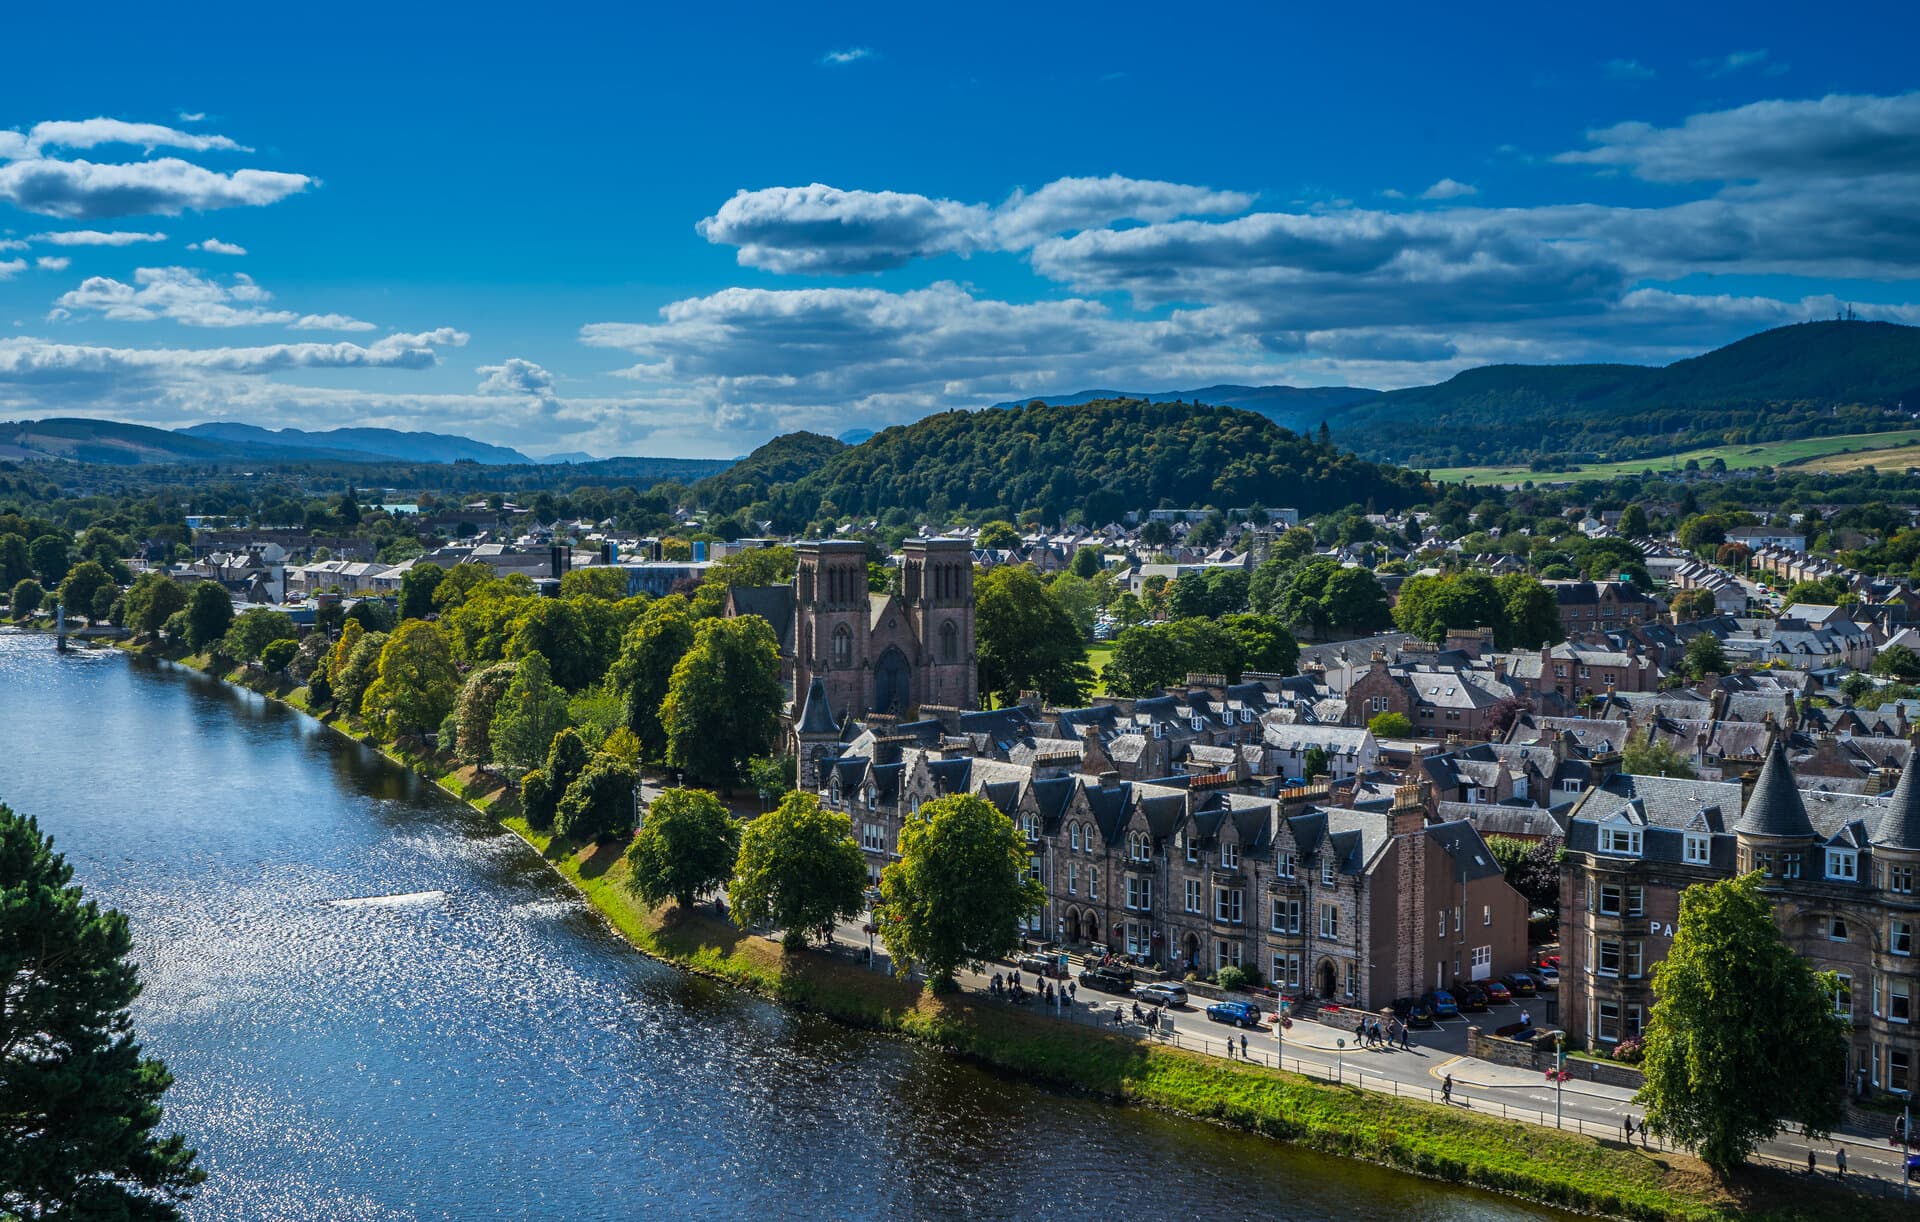 View of Inverness skyline with the cathedral in the foreground